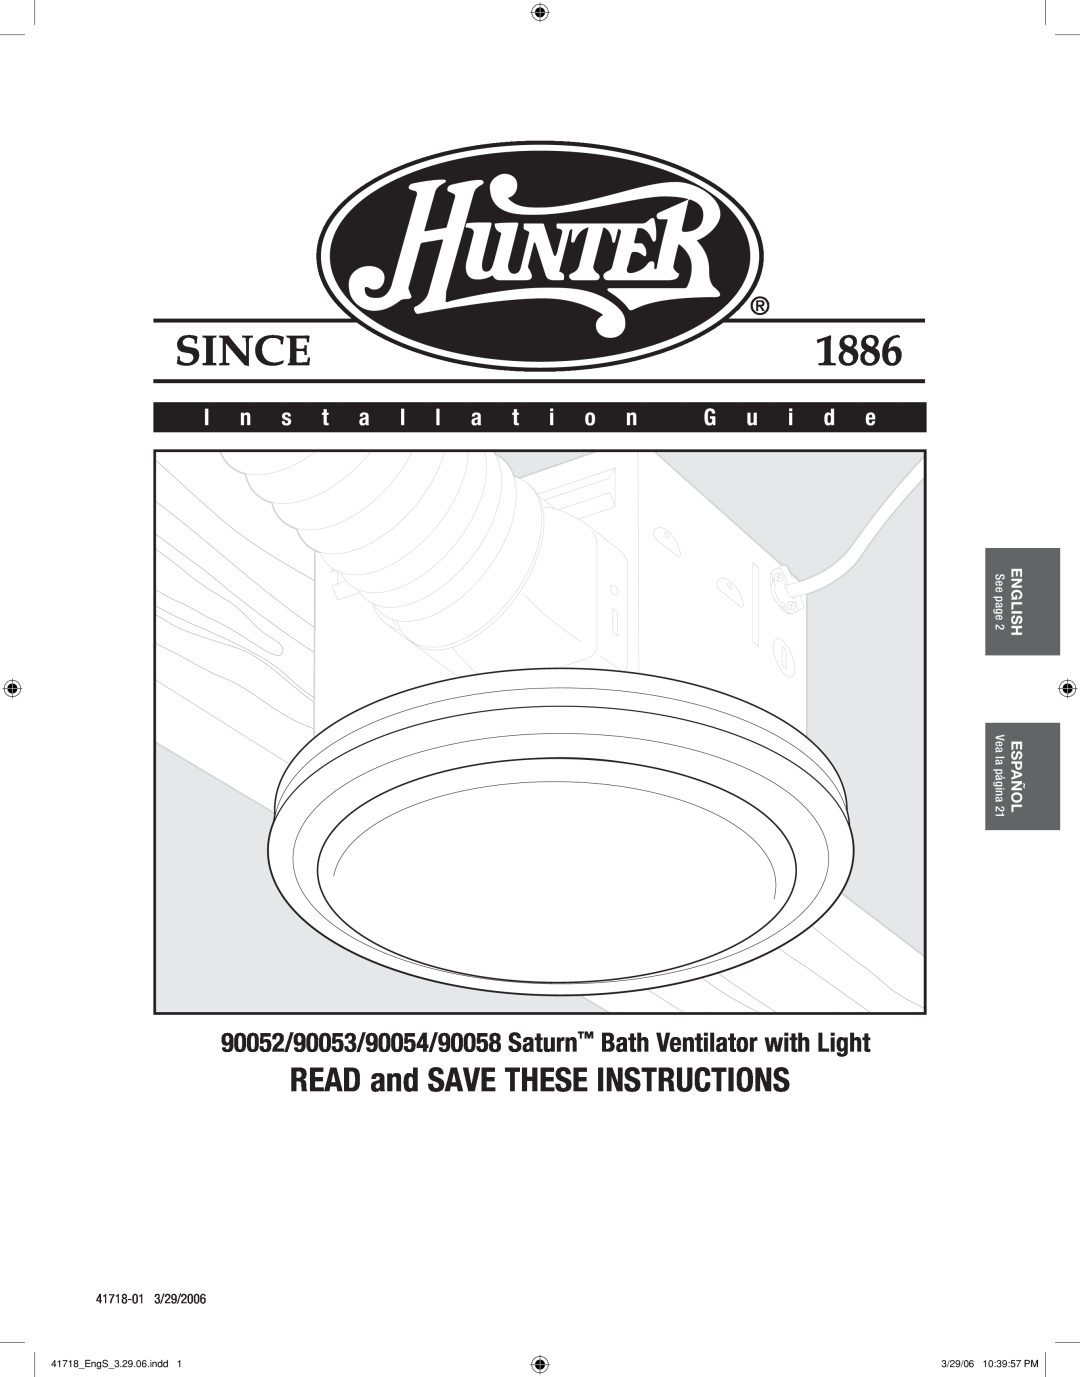 Hunter Fan manual READ and SAVE THESE INSTRUCTIONS, 90052/90053/90054/90058 Saturn Bath Ventilator with Light, English 